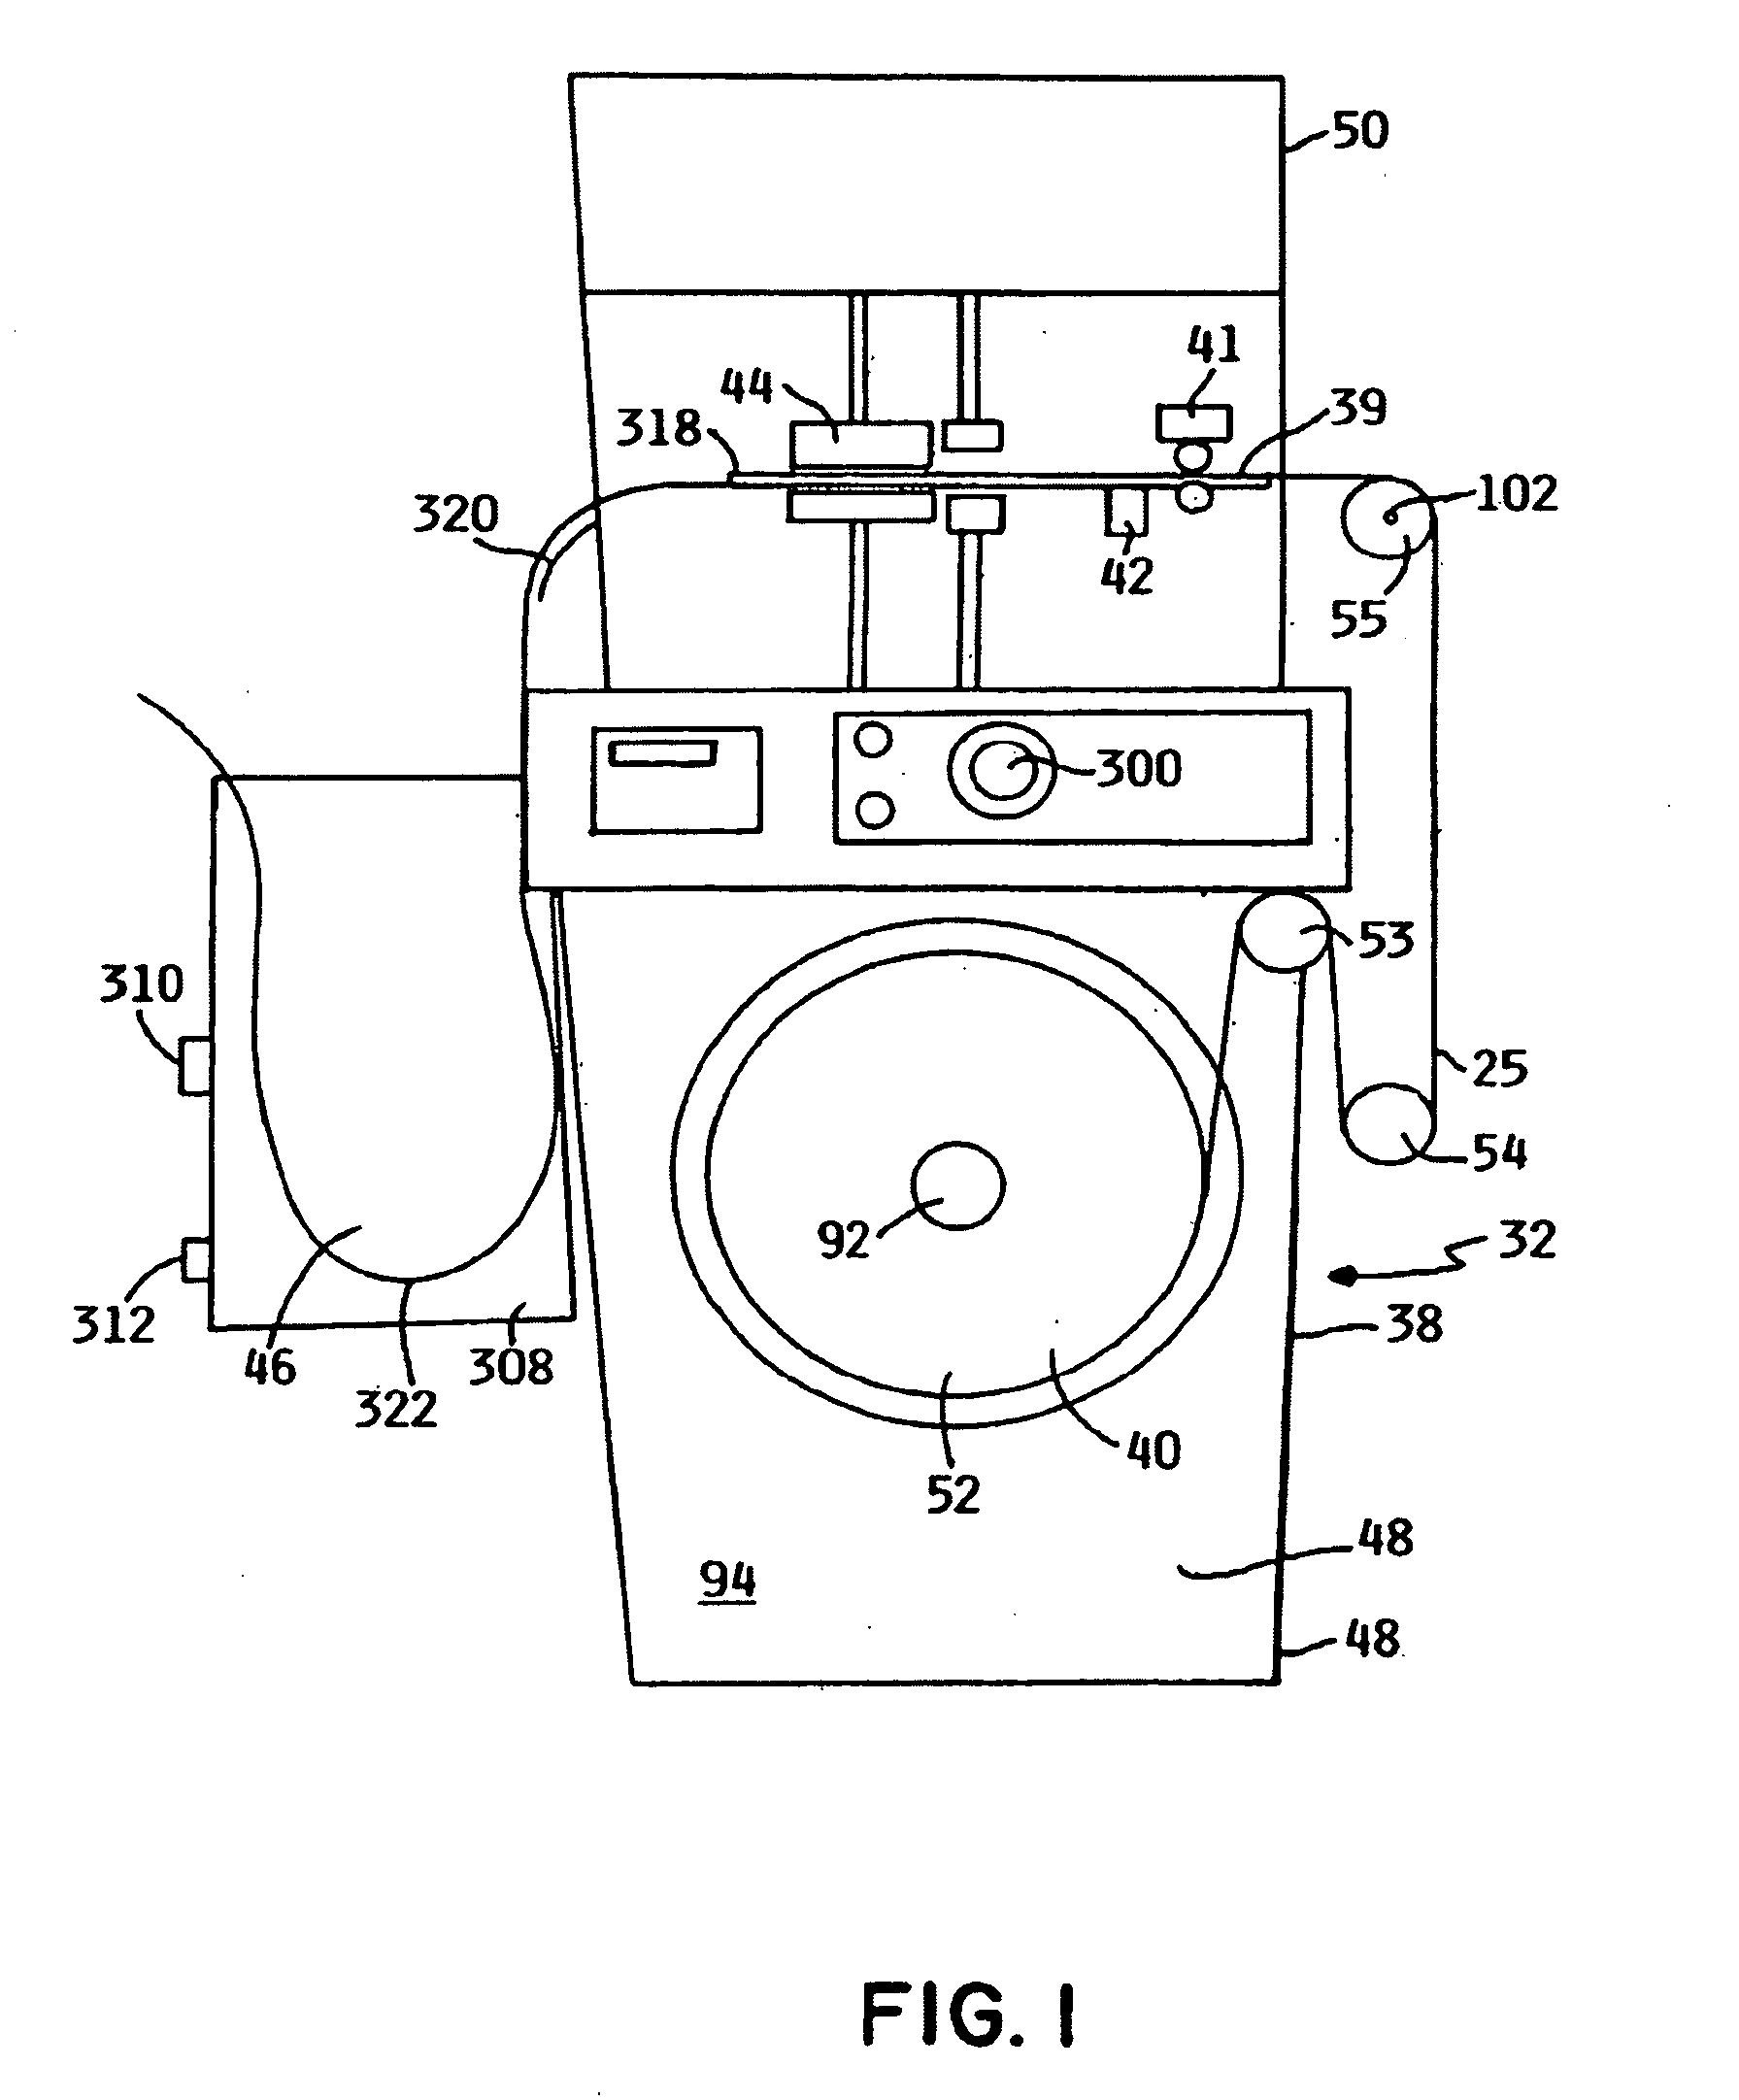 Plastic Embossed Carrier Tape Apparatus and Process